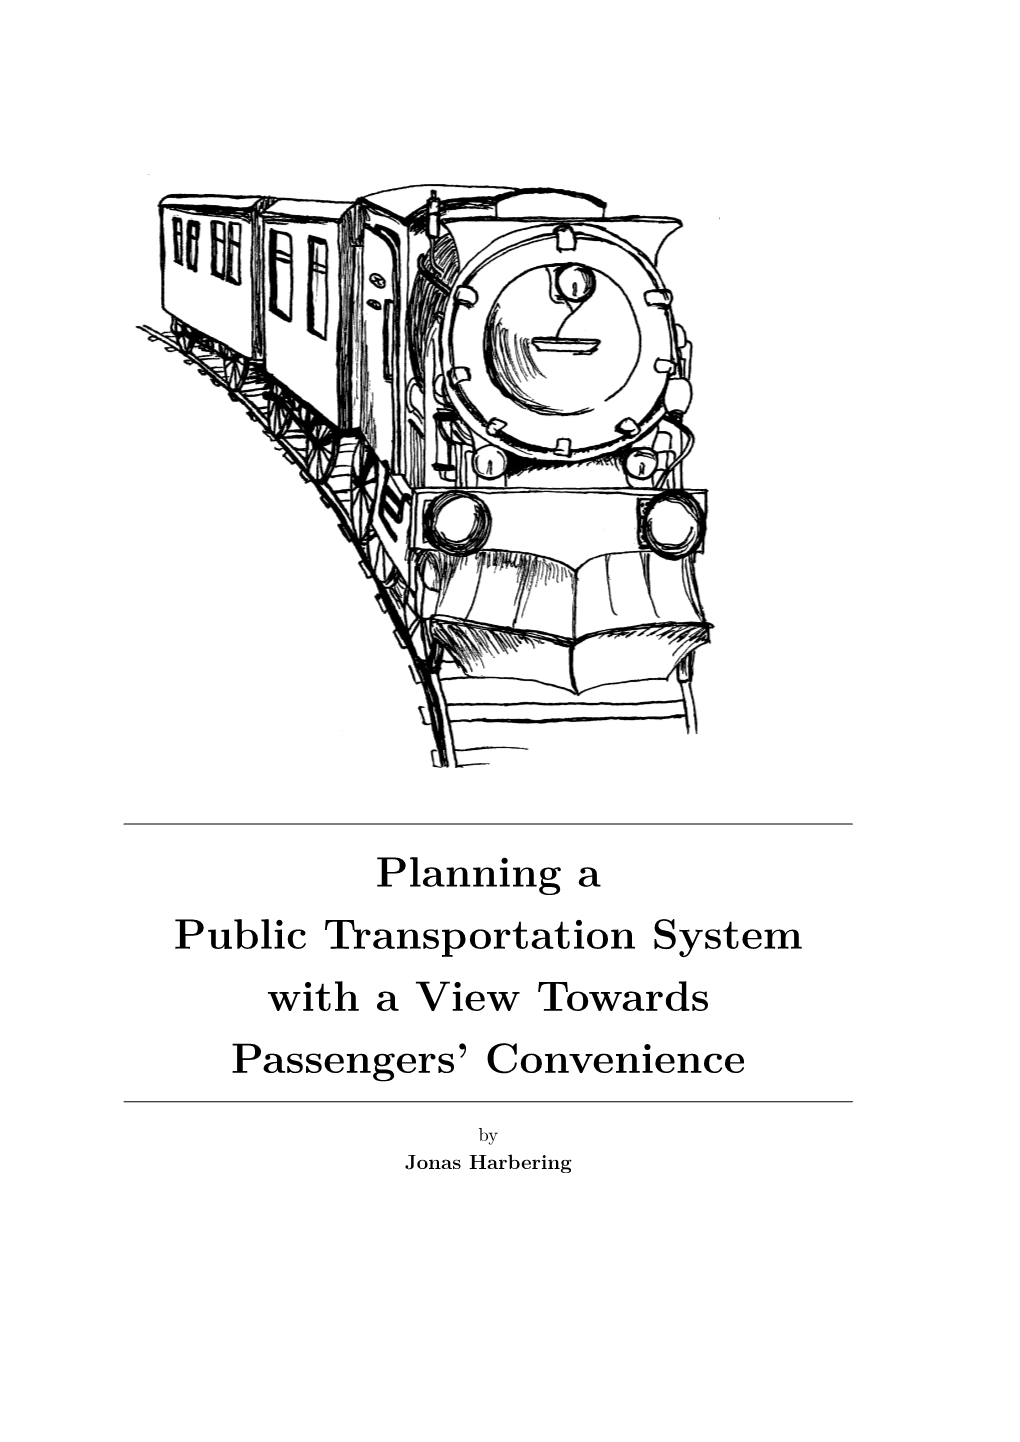 Planning a Public Transportation System with a View Towards Passengers’ Convenience